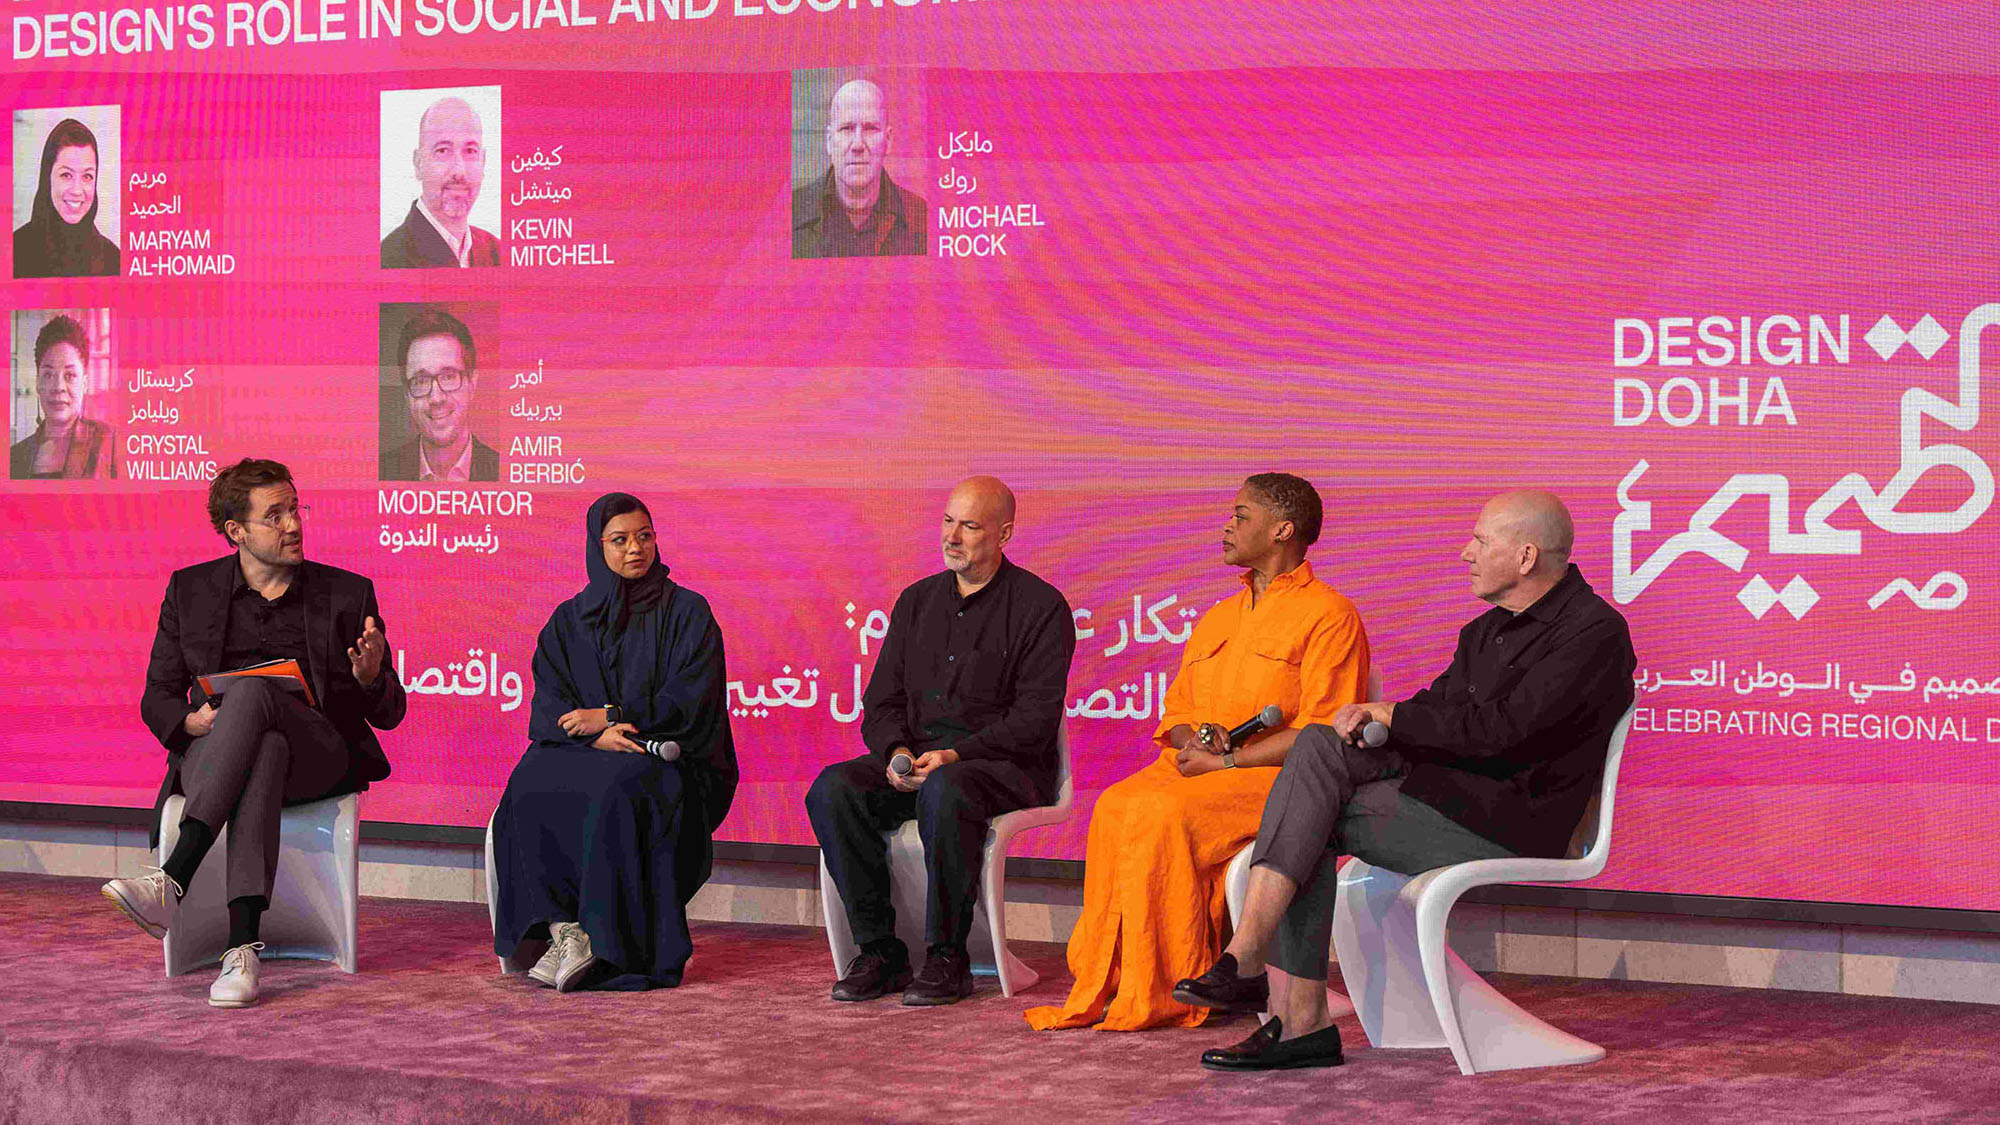 Dean Amir Moderated A Panel Discussion Titled , Innovation By Education . Design’s Role In Social And Economic Development